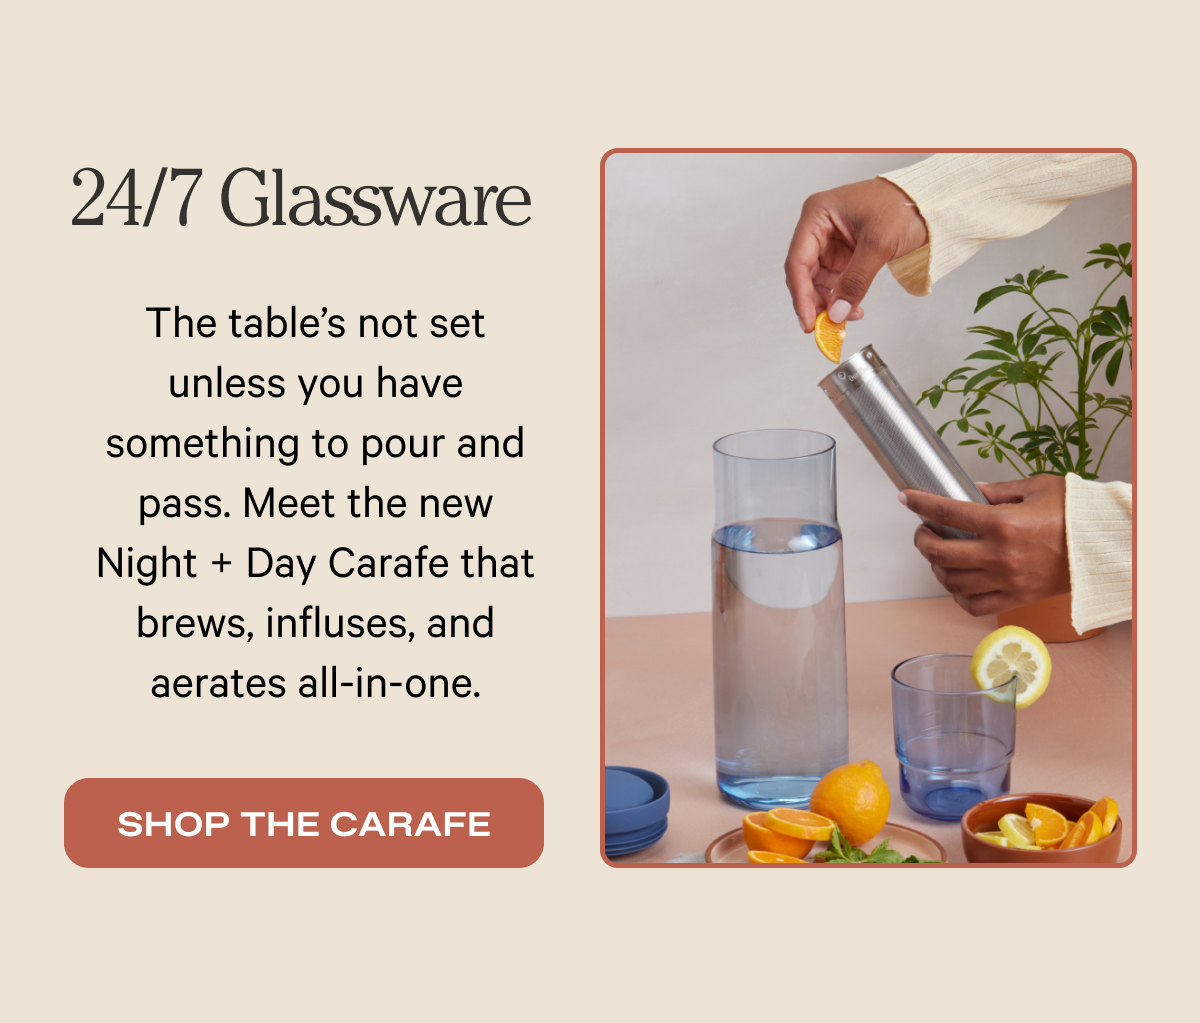 24/7 Glassware - The table’s not set unless you have something to pour and pass. Meet the new Night + Day Carafe that brews, infuses, and aerates all-in-one.. - Shop the Carafe